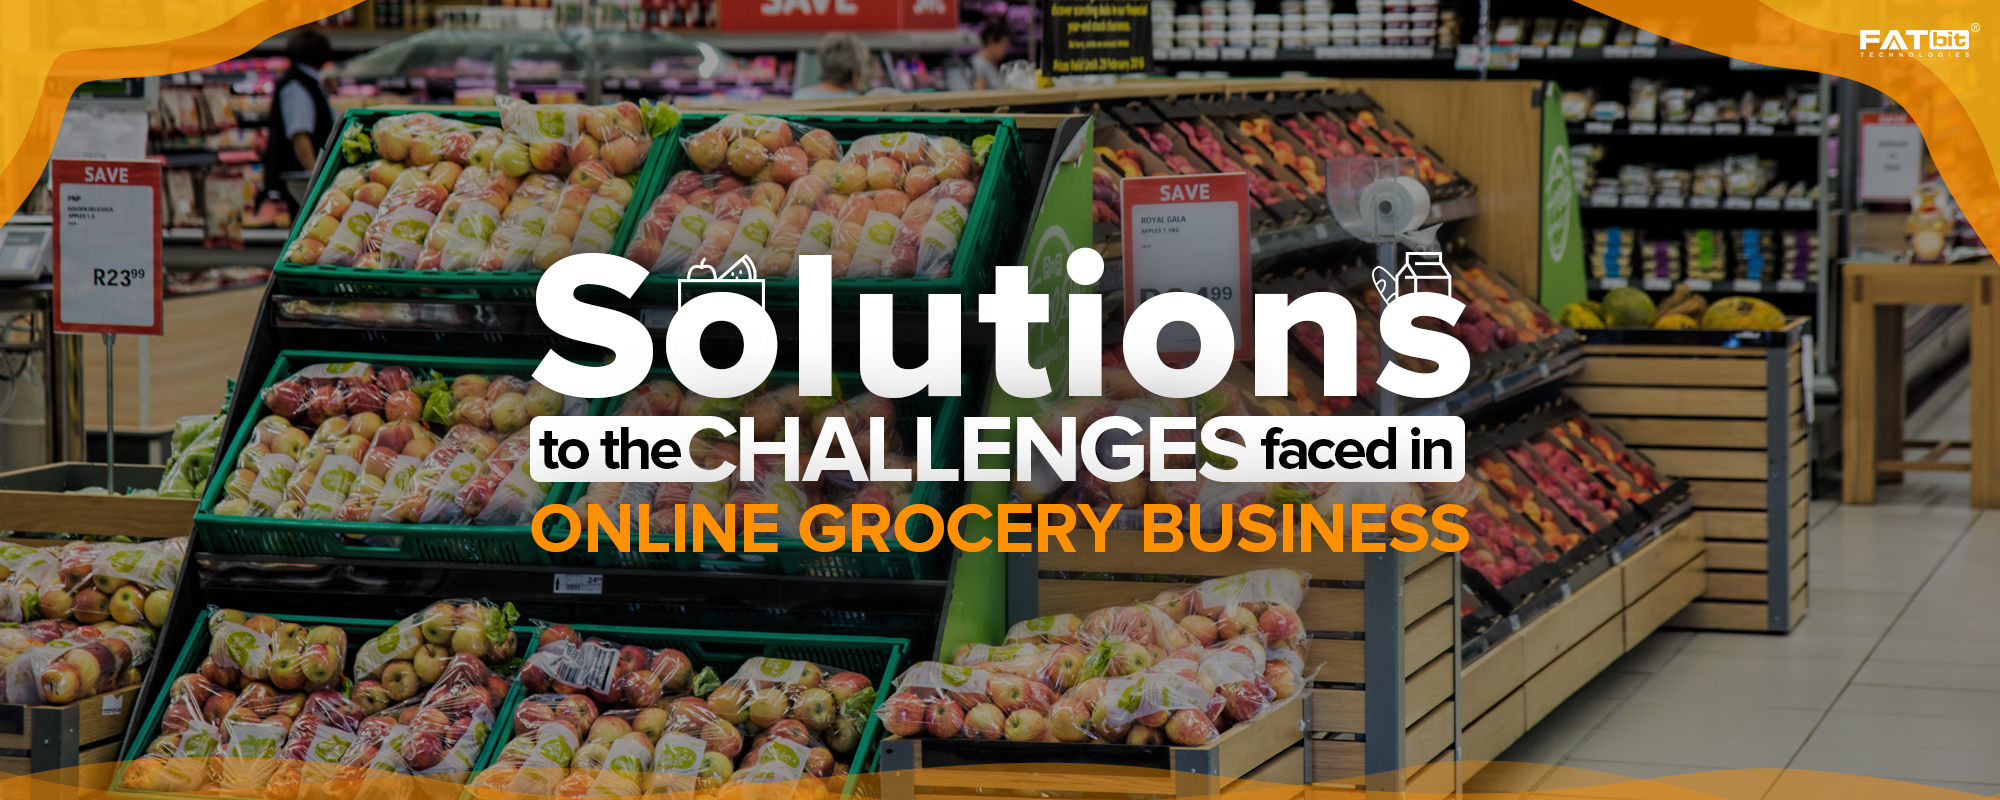 https://www.fatbit.com/fab/wp-content/uploads/2017/08/Solutions-to-challenges-faced-in-grocery-business-main.jpg